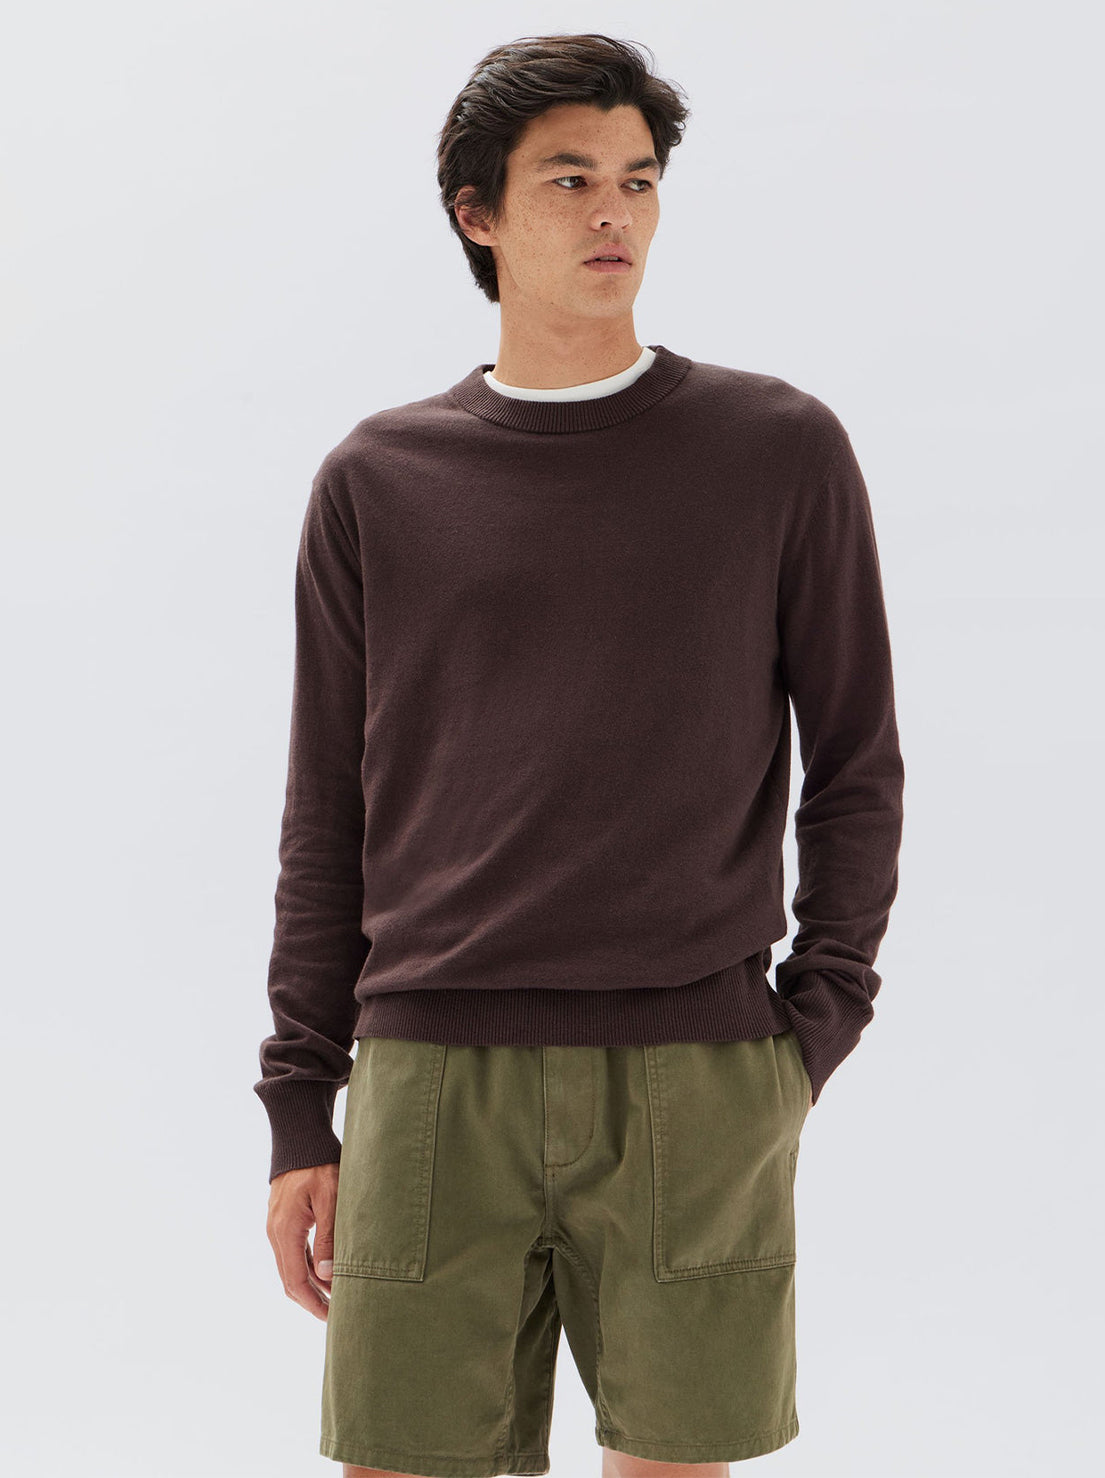 Assembly - Mens Cotton Cashmere Long Sleeve Sweater - Chestnut